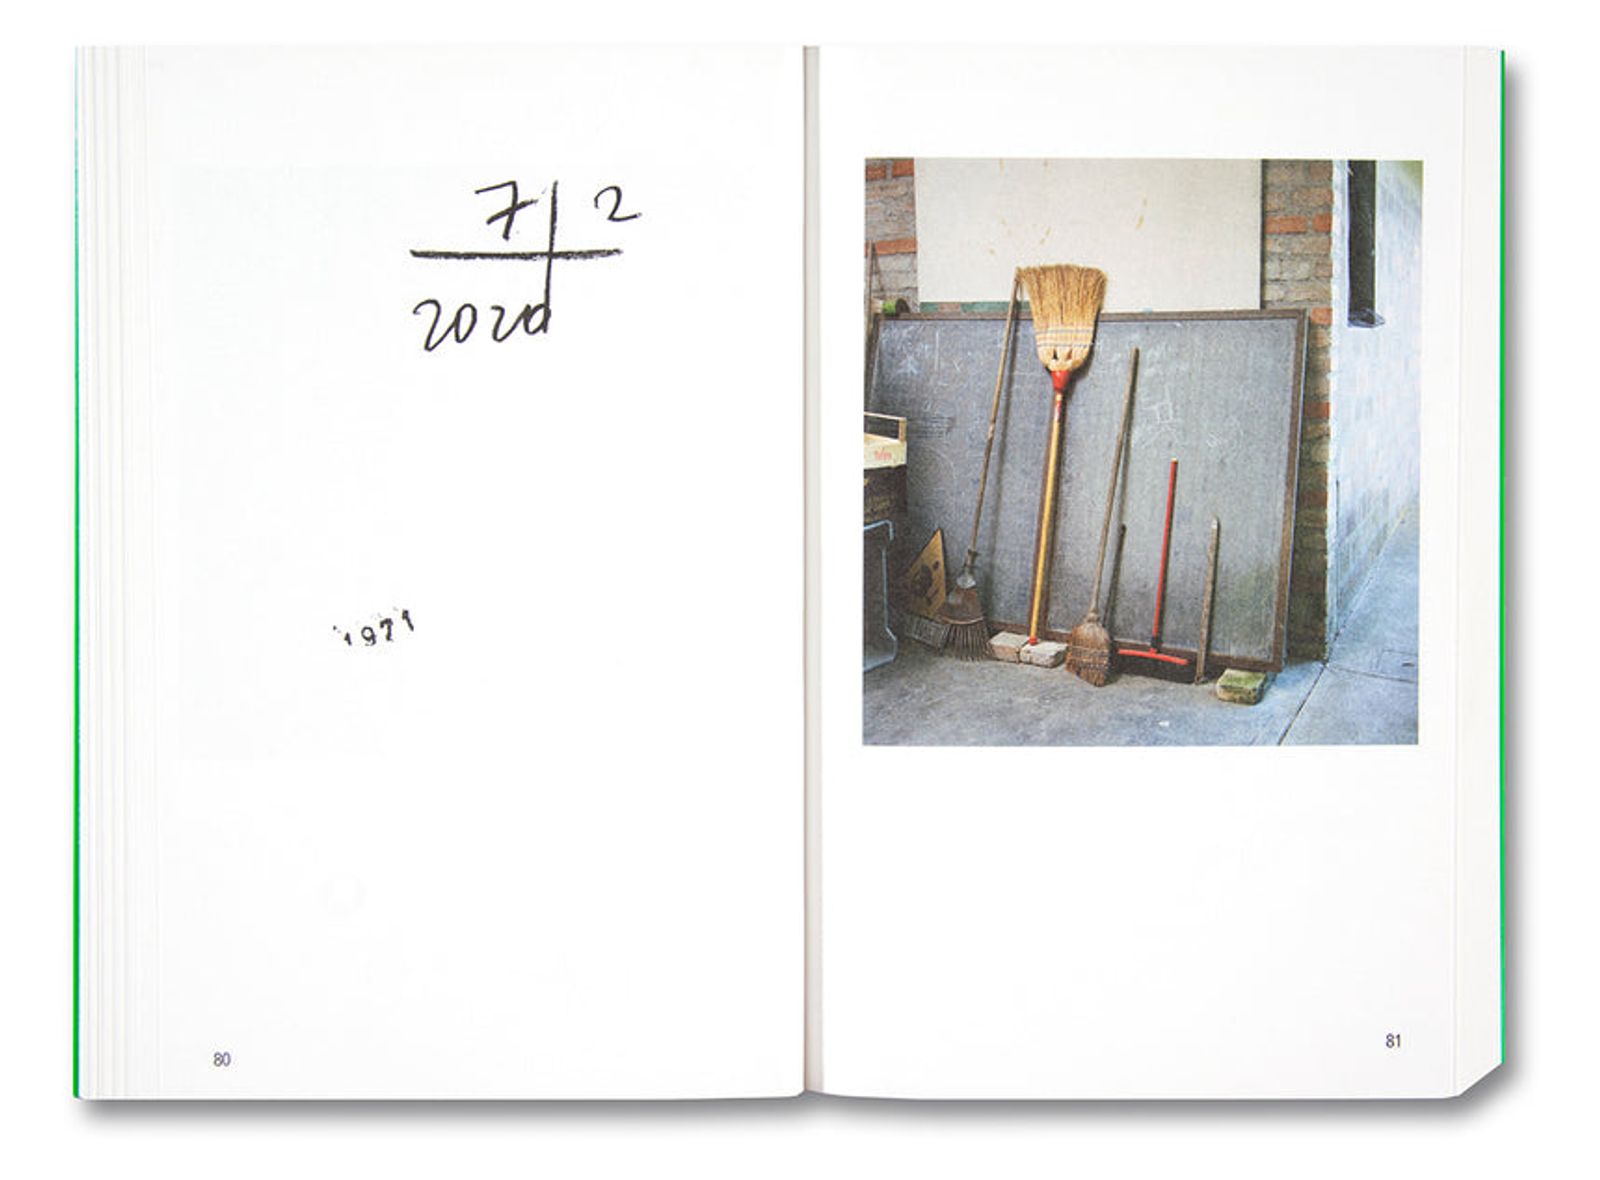 Photobook Review: The Heart Is A Sandwich By Jason Fulford